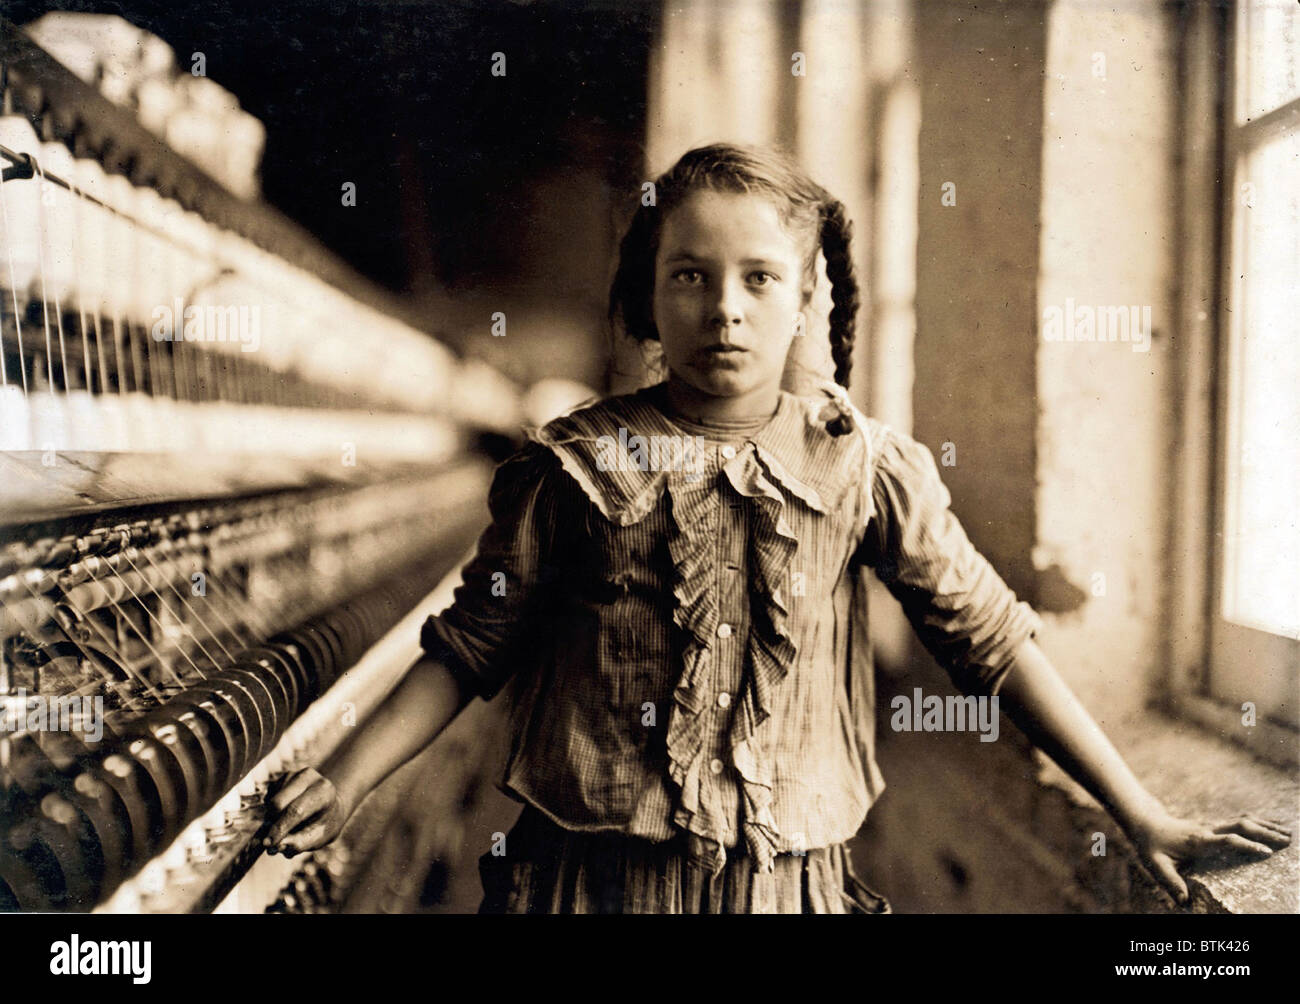 Child laborer portrayed by Lewis Hine in 1908. One of the young spinners in a North Carolina cotton mill earns forty-eight cents a day. Stock Photo